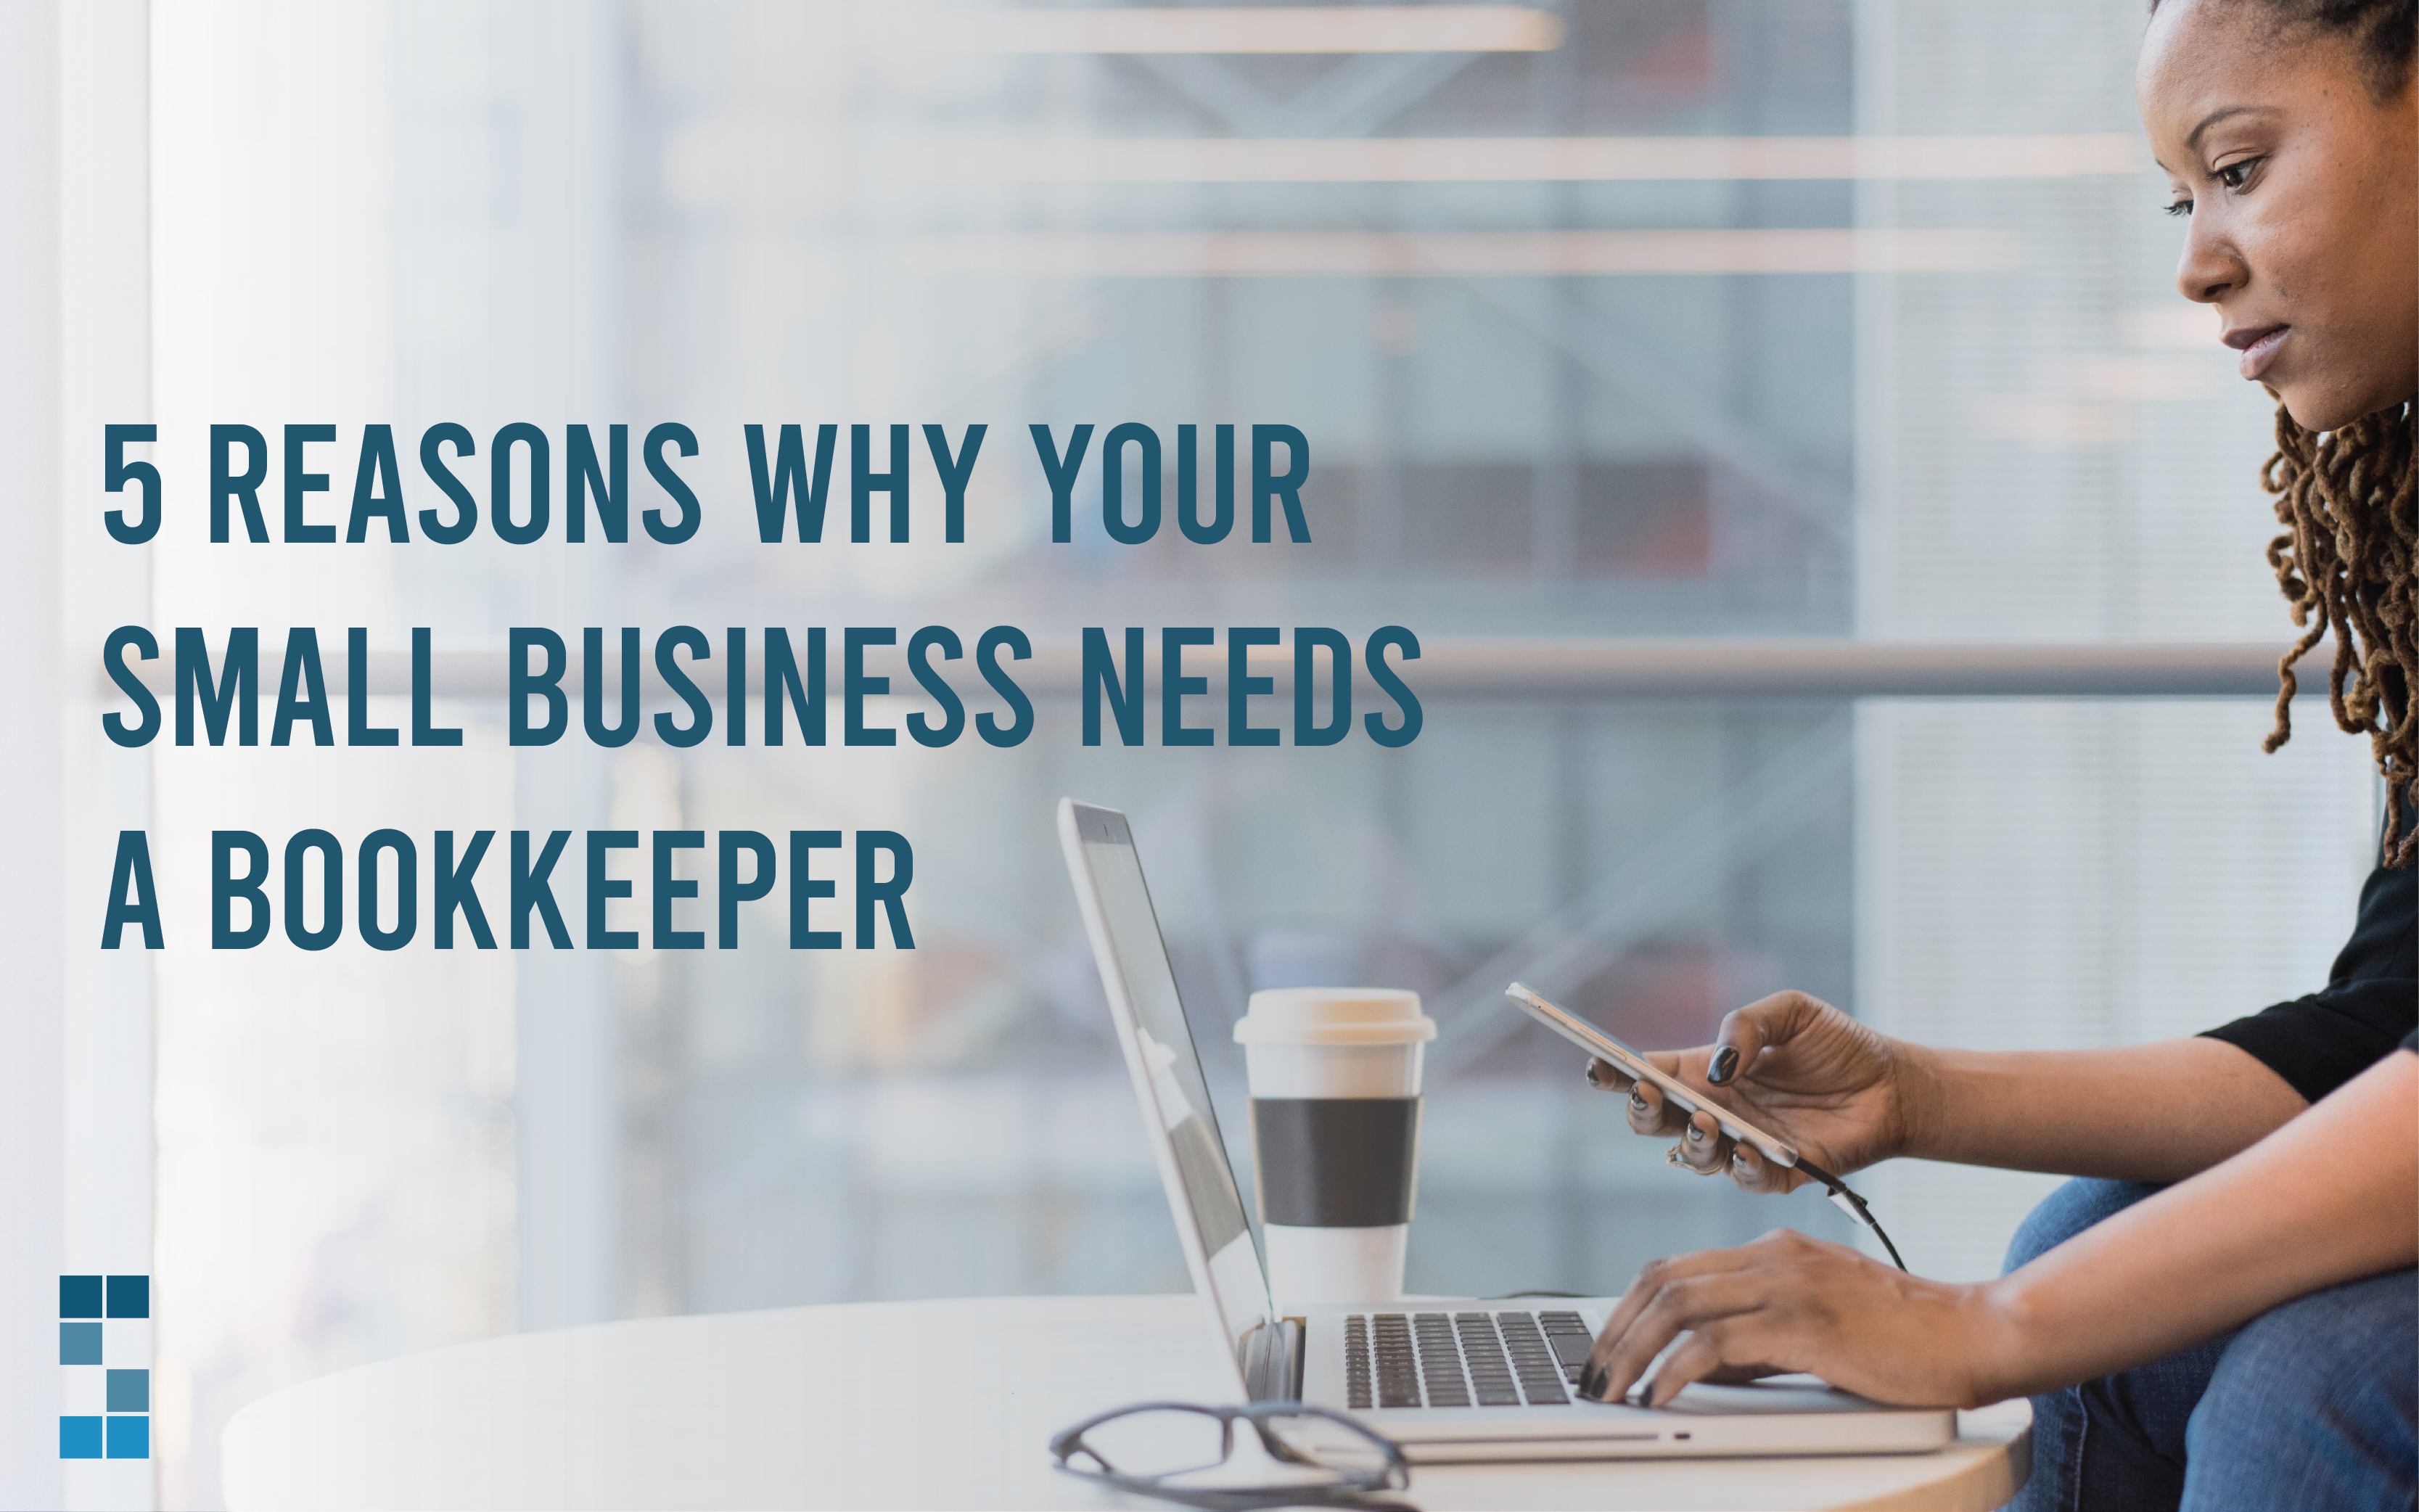 5 Reasons Your Small Business Needs a Bookkeeper